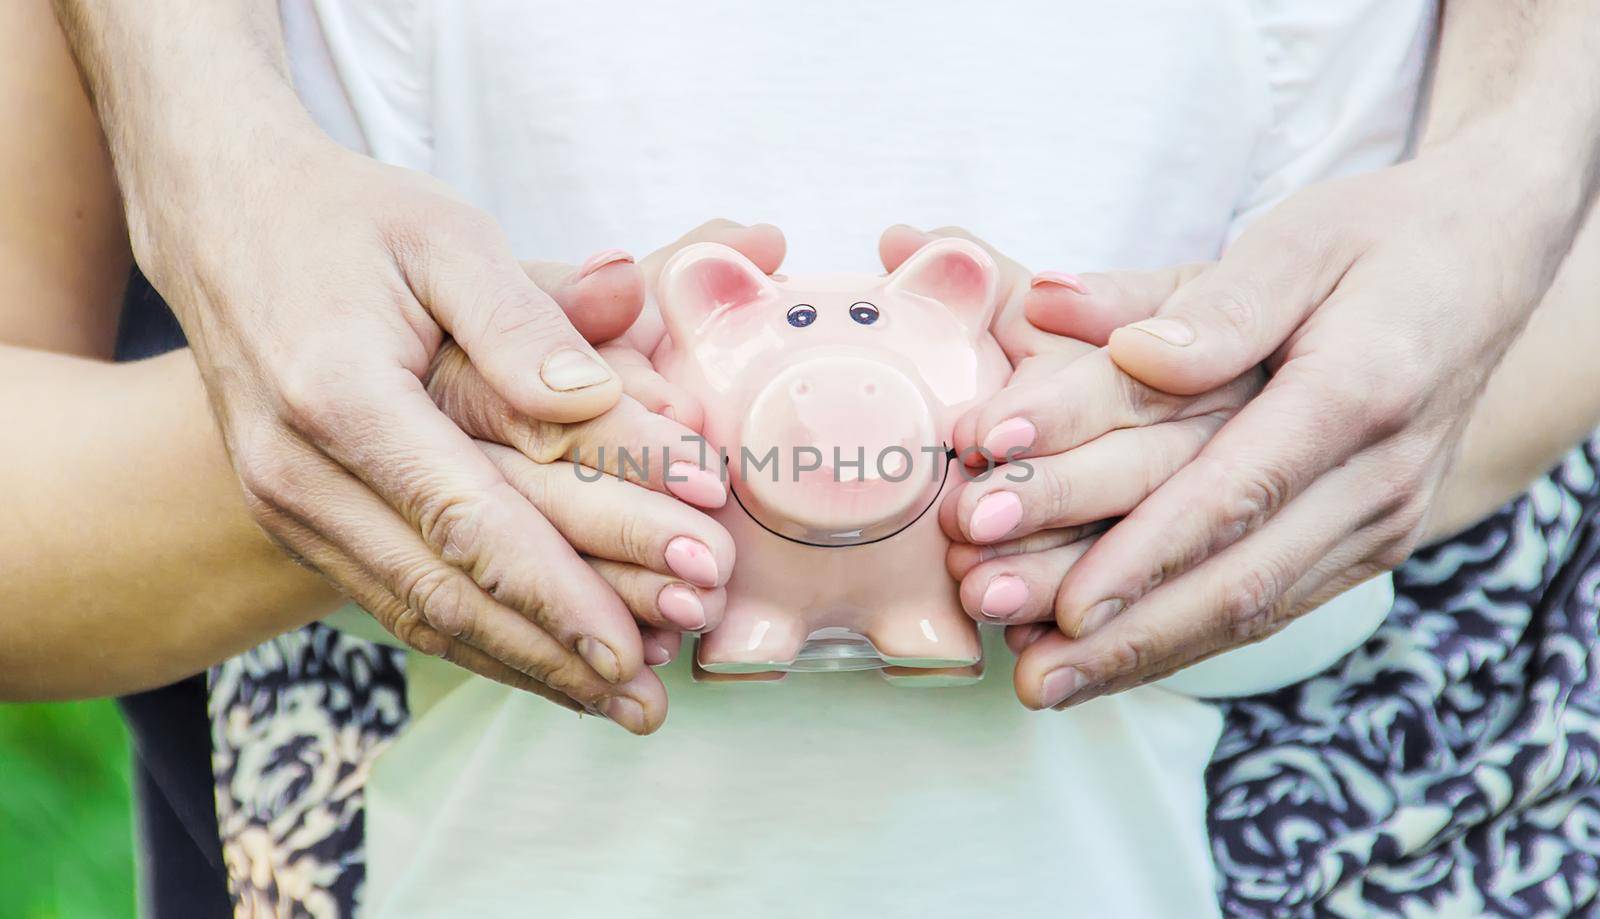 The child and parents are holding a piggy bank in their hands. nature.